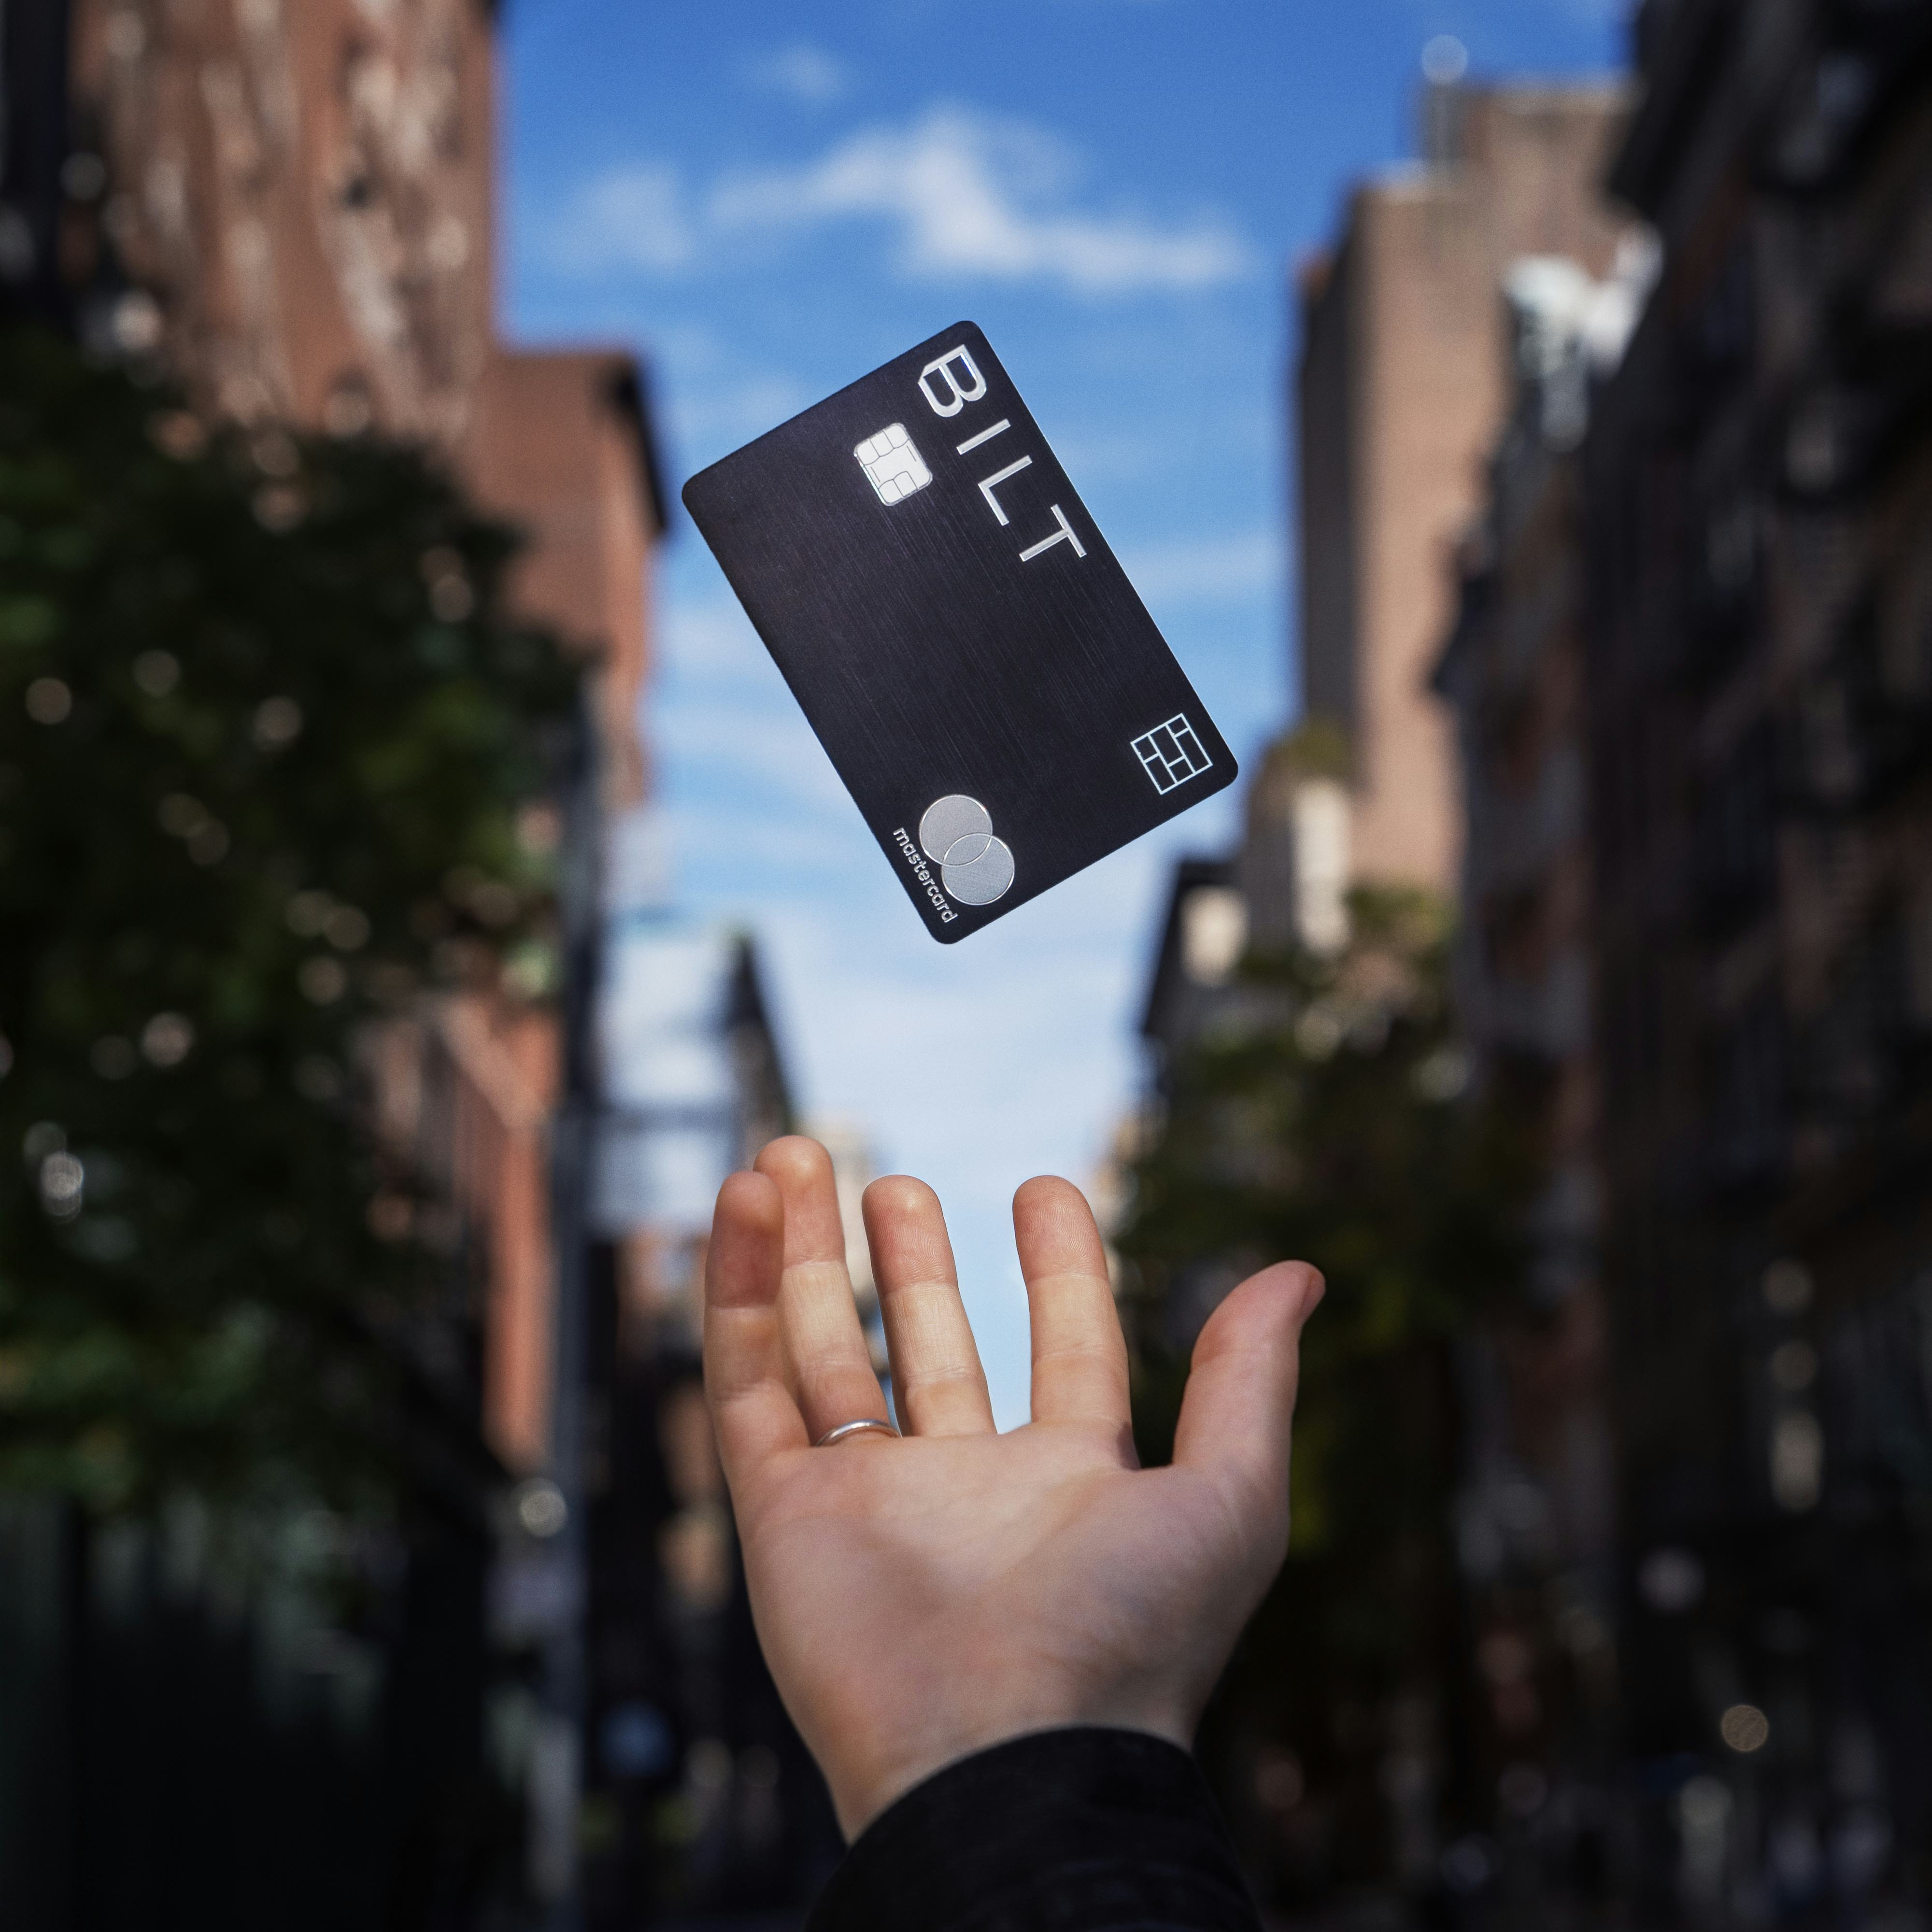 Bilt card floating against city background above outstretched hand